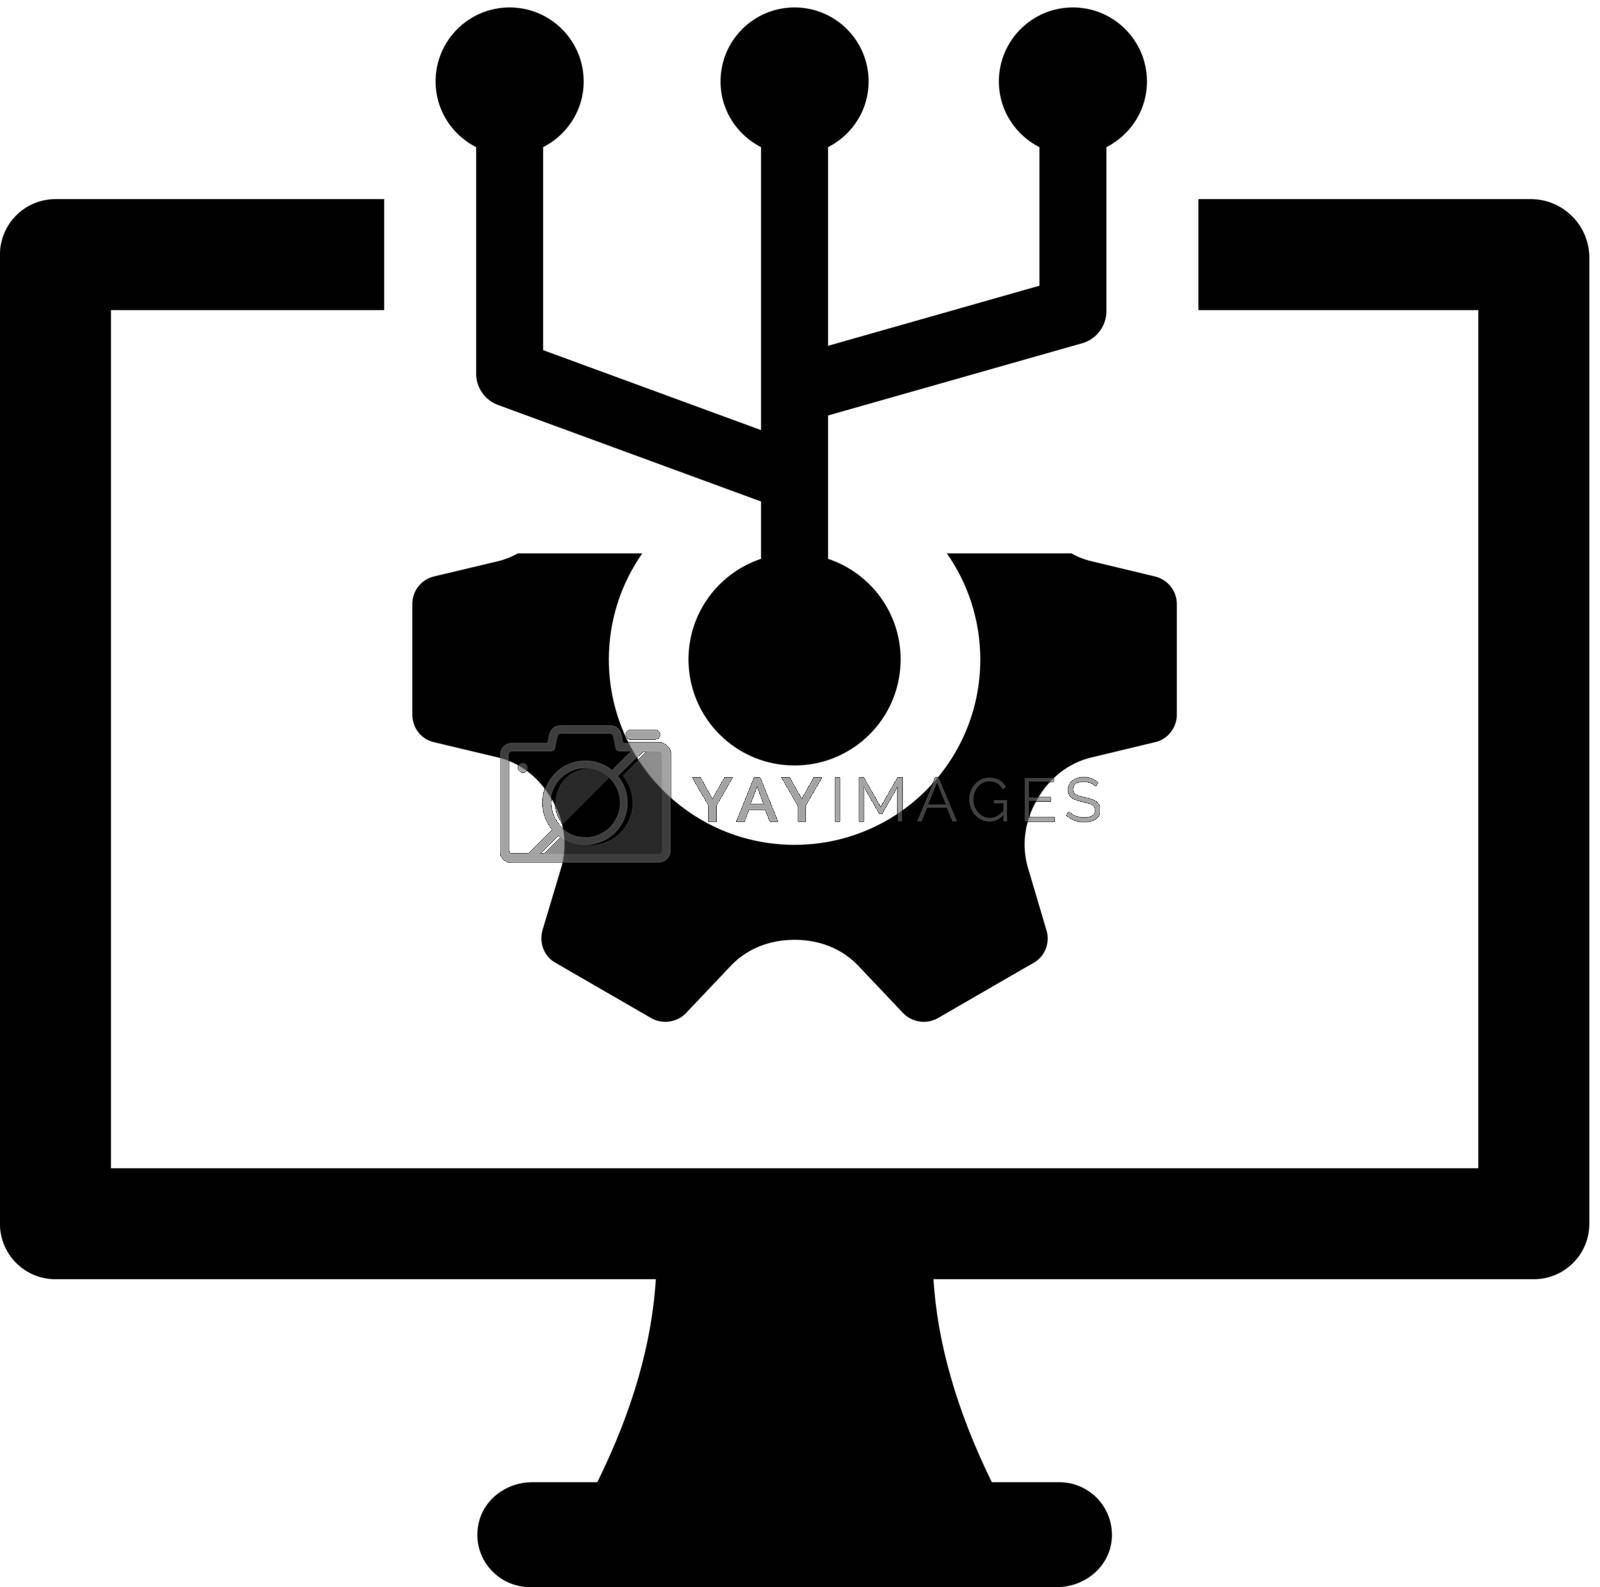 Royalty free image of Information technology icon by delwar018